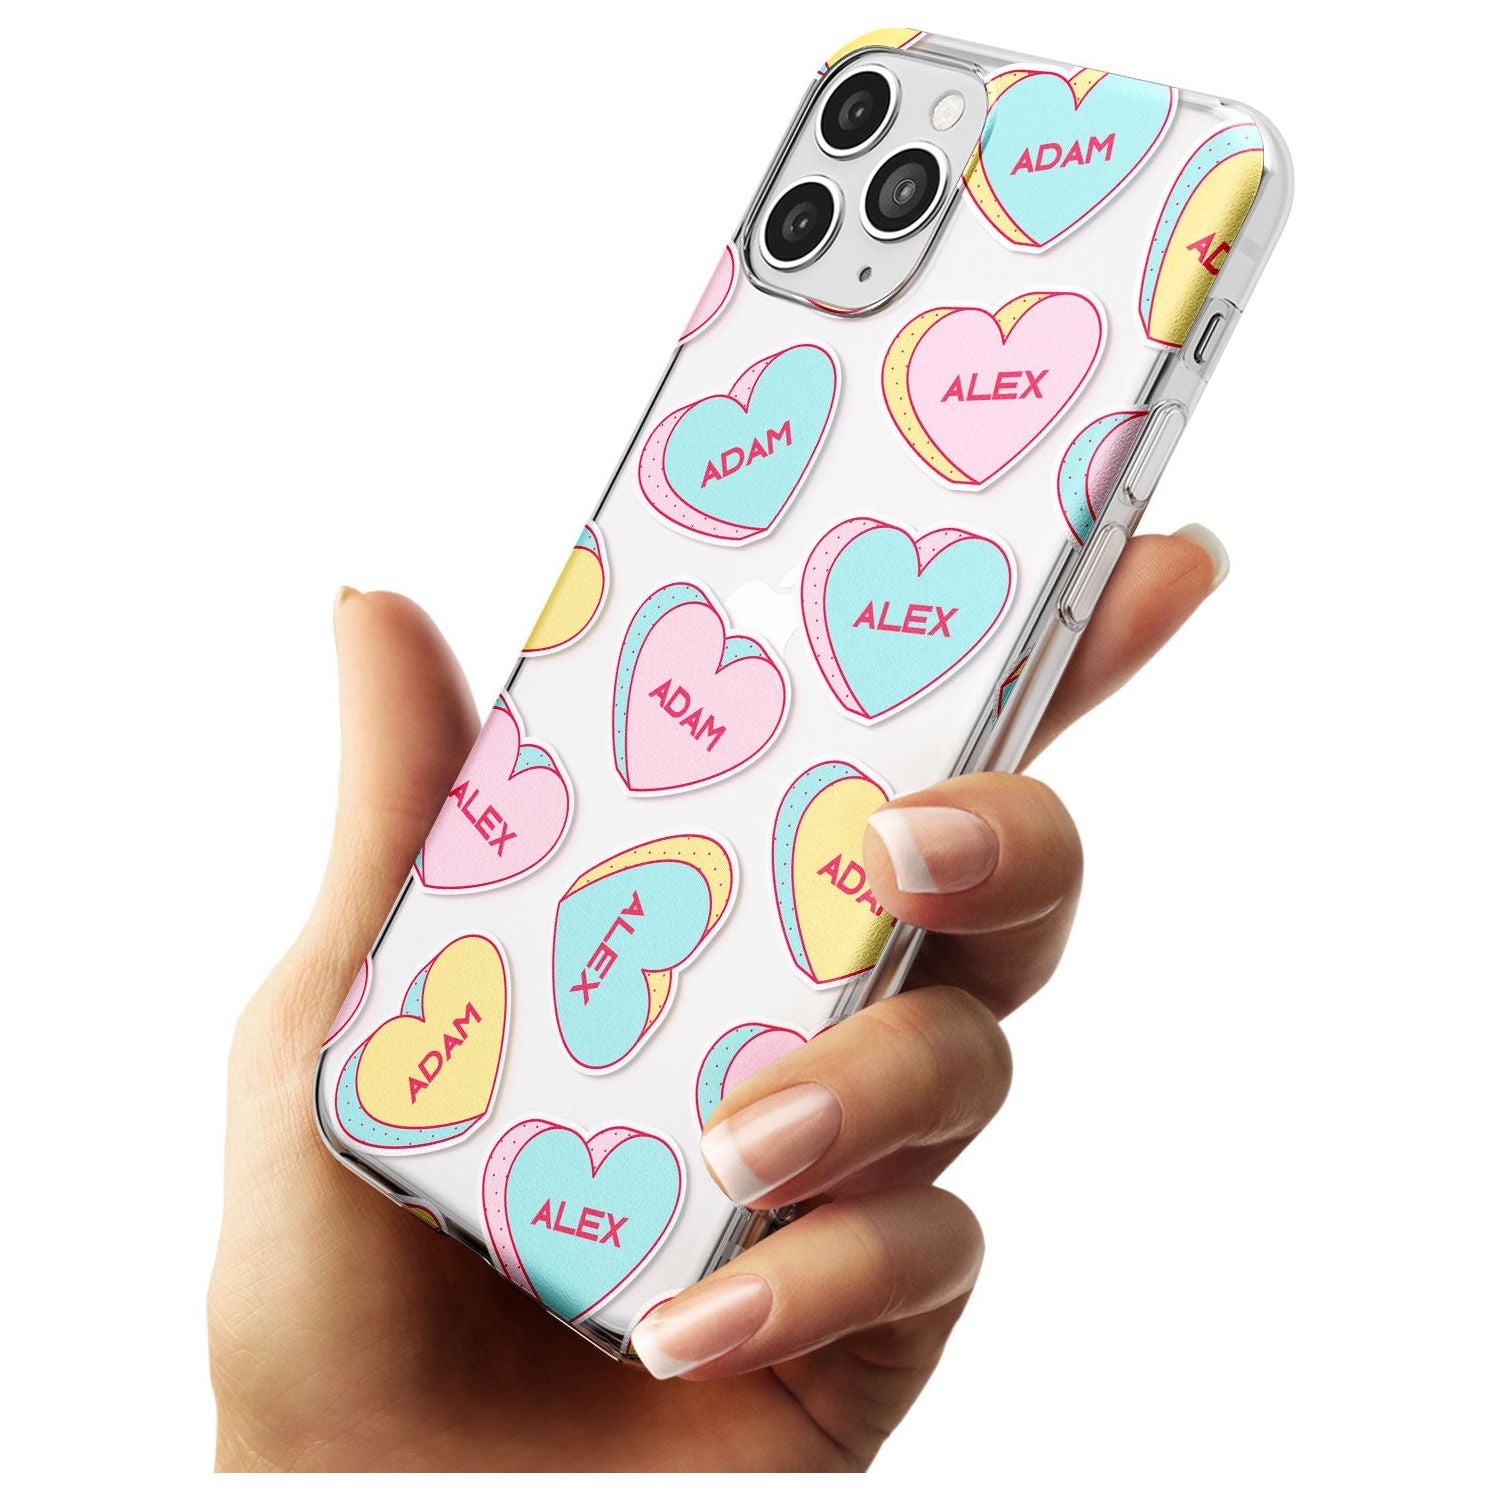 Custom Text Love Hearts Black Impact Phone Case for iPhone 11 Pro Max